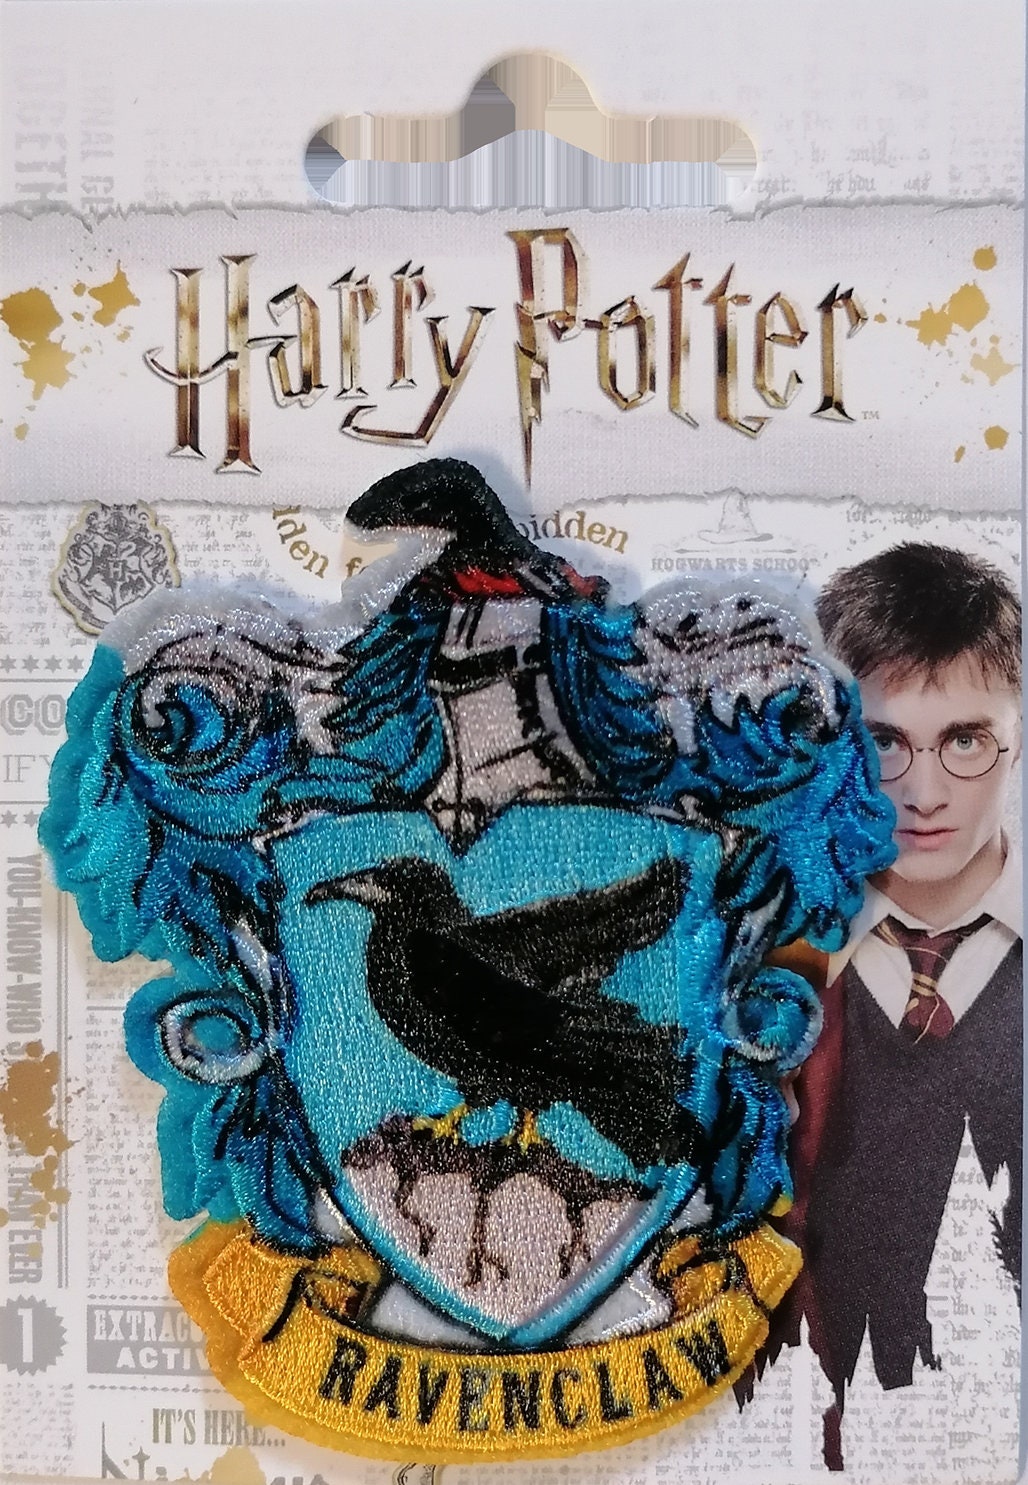 Harry Potter © Ravenclaw Crest Application / Patches -  Denmark